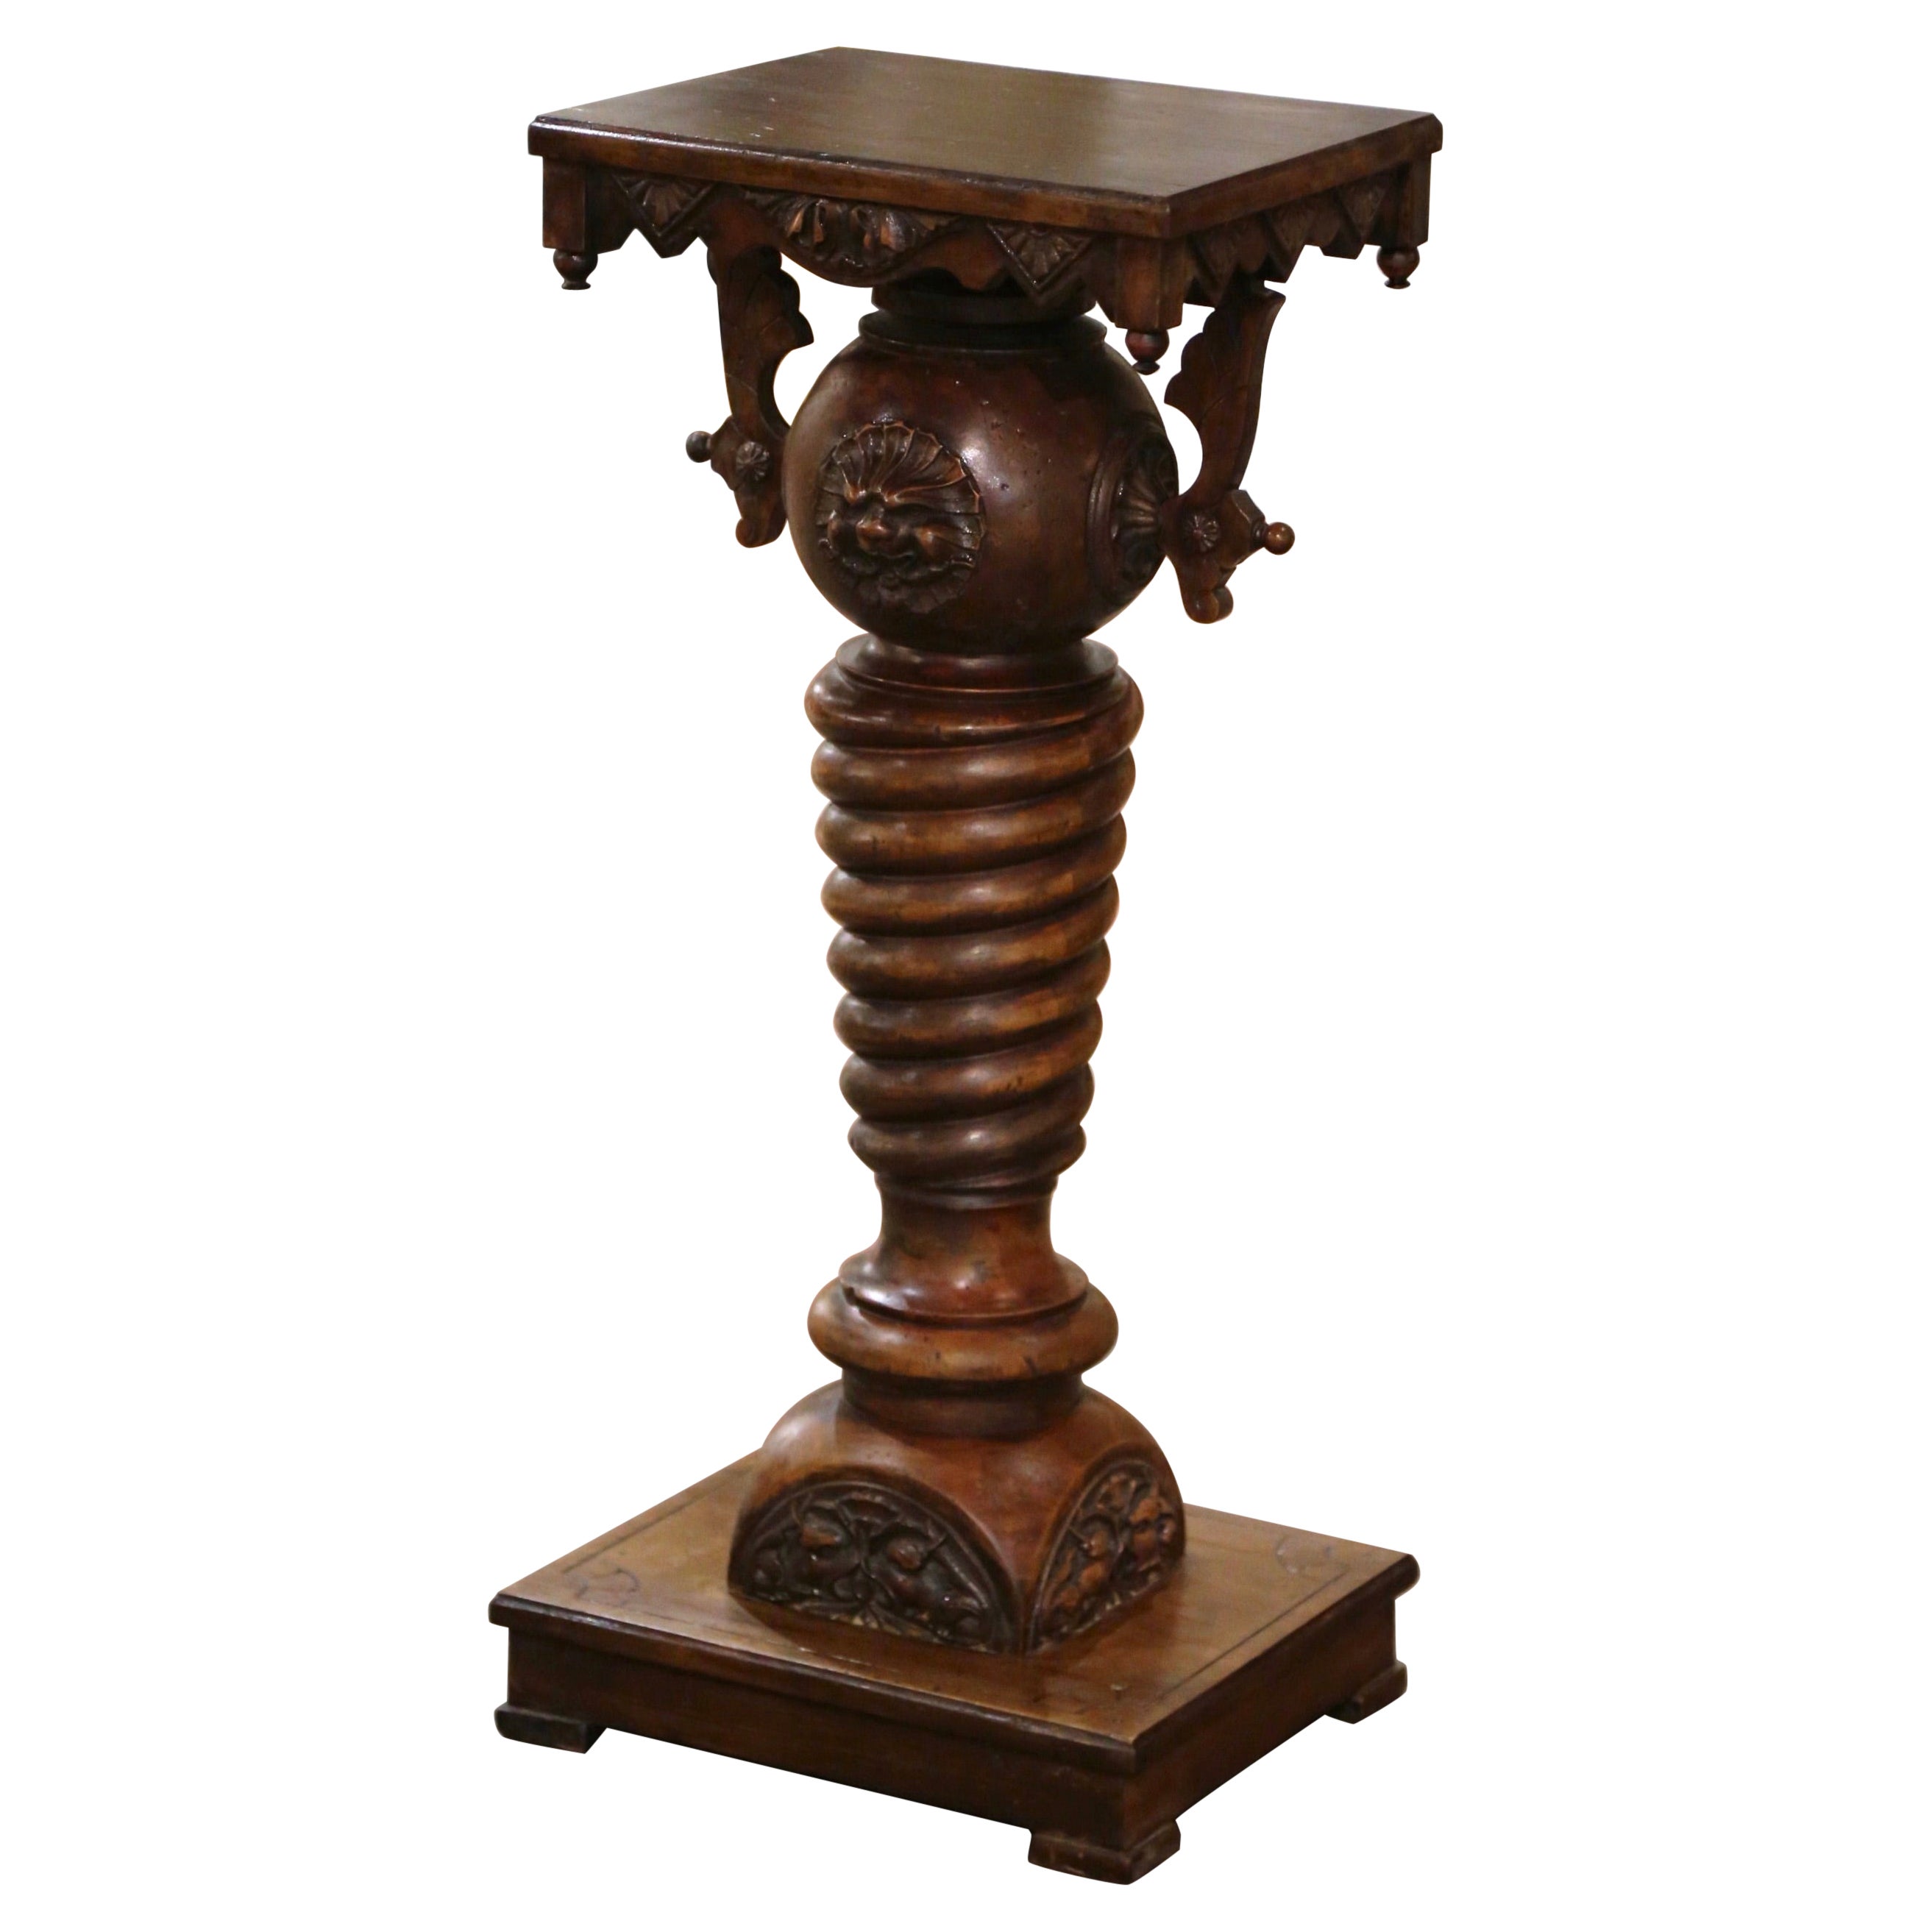 Early 20th Century French Baroque Carved Mahogany Barley Twist Pedestal Table For Sale